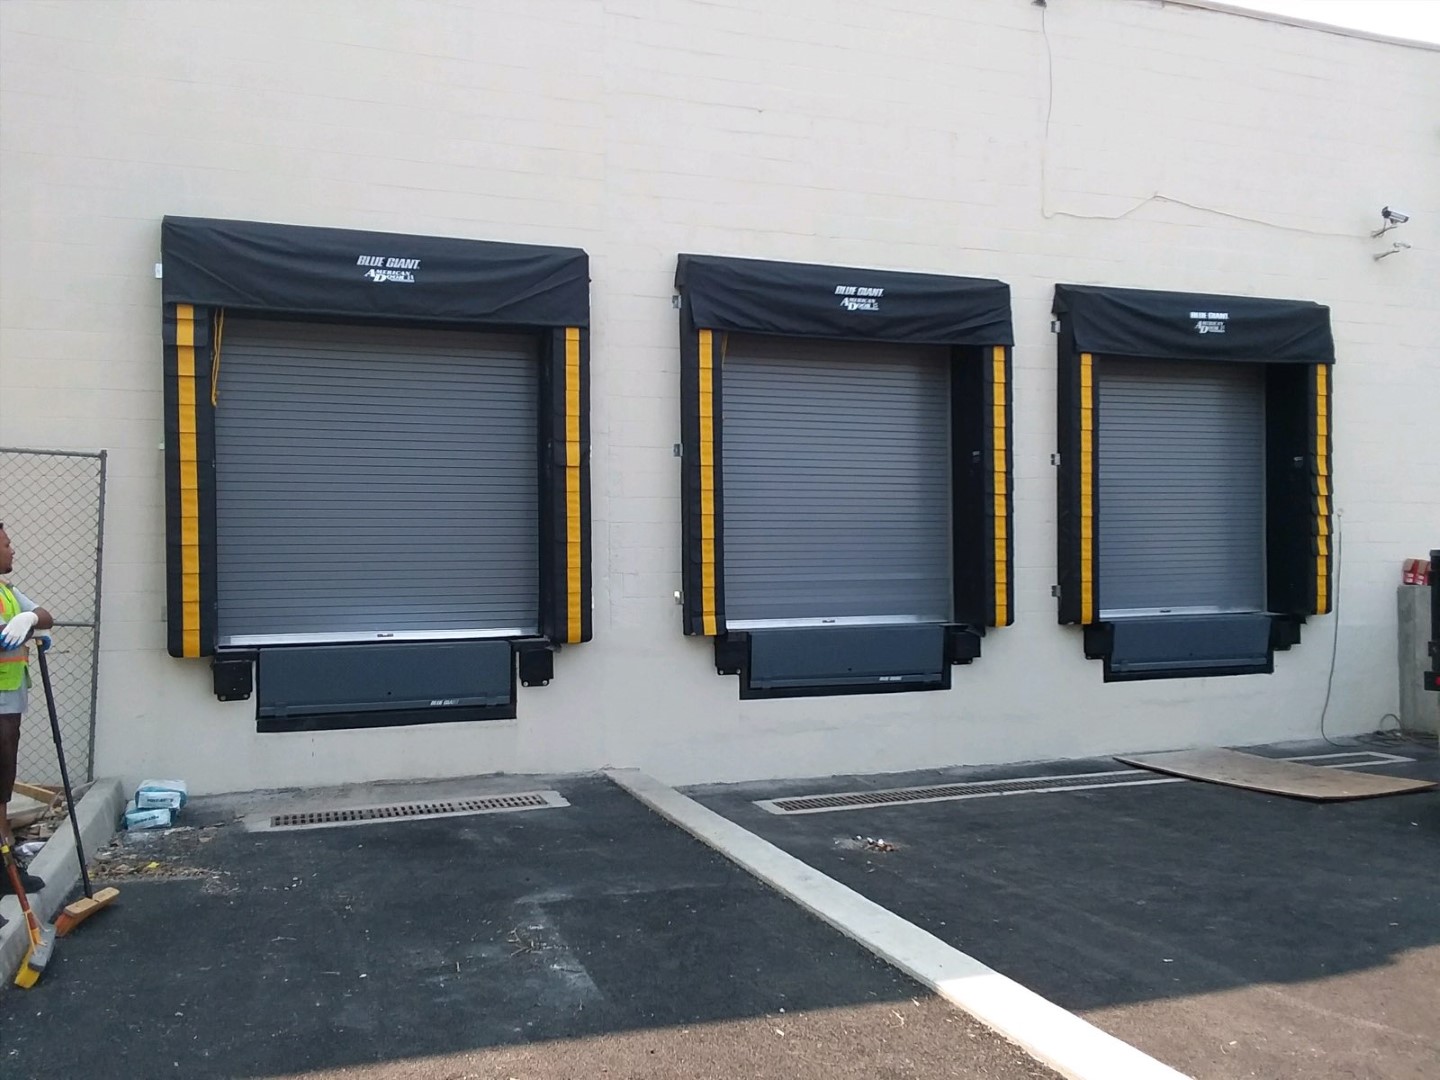 3 loading docks with Head Curtain Dock Seal, rolling doors and dock levelers